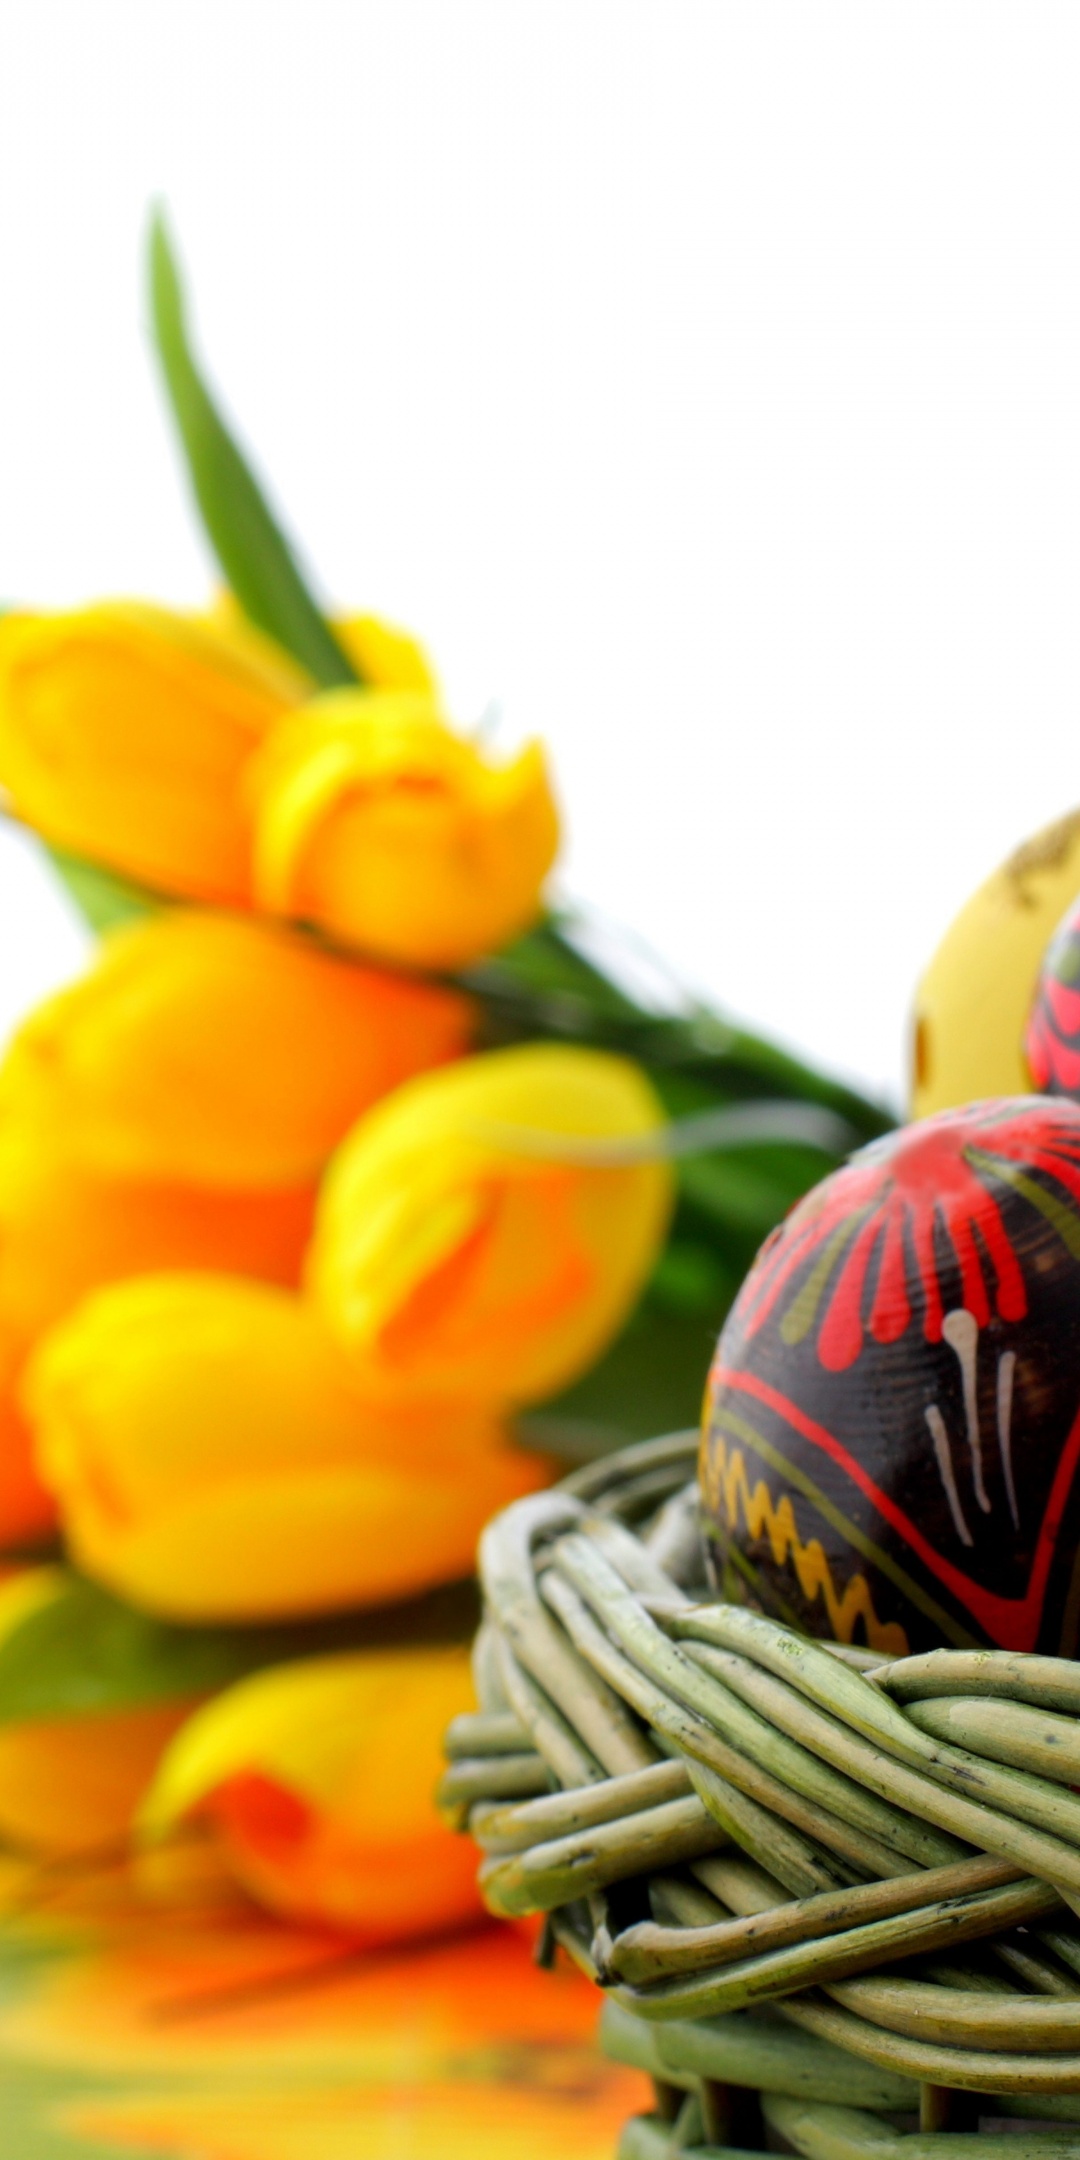 Easter Basket Of Eggs And Tulips